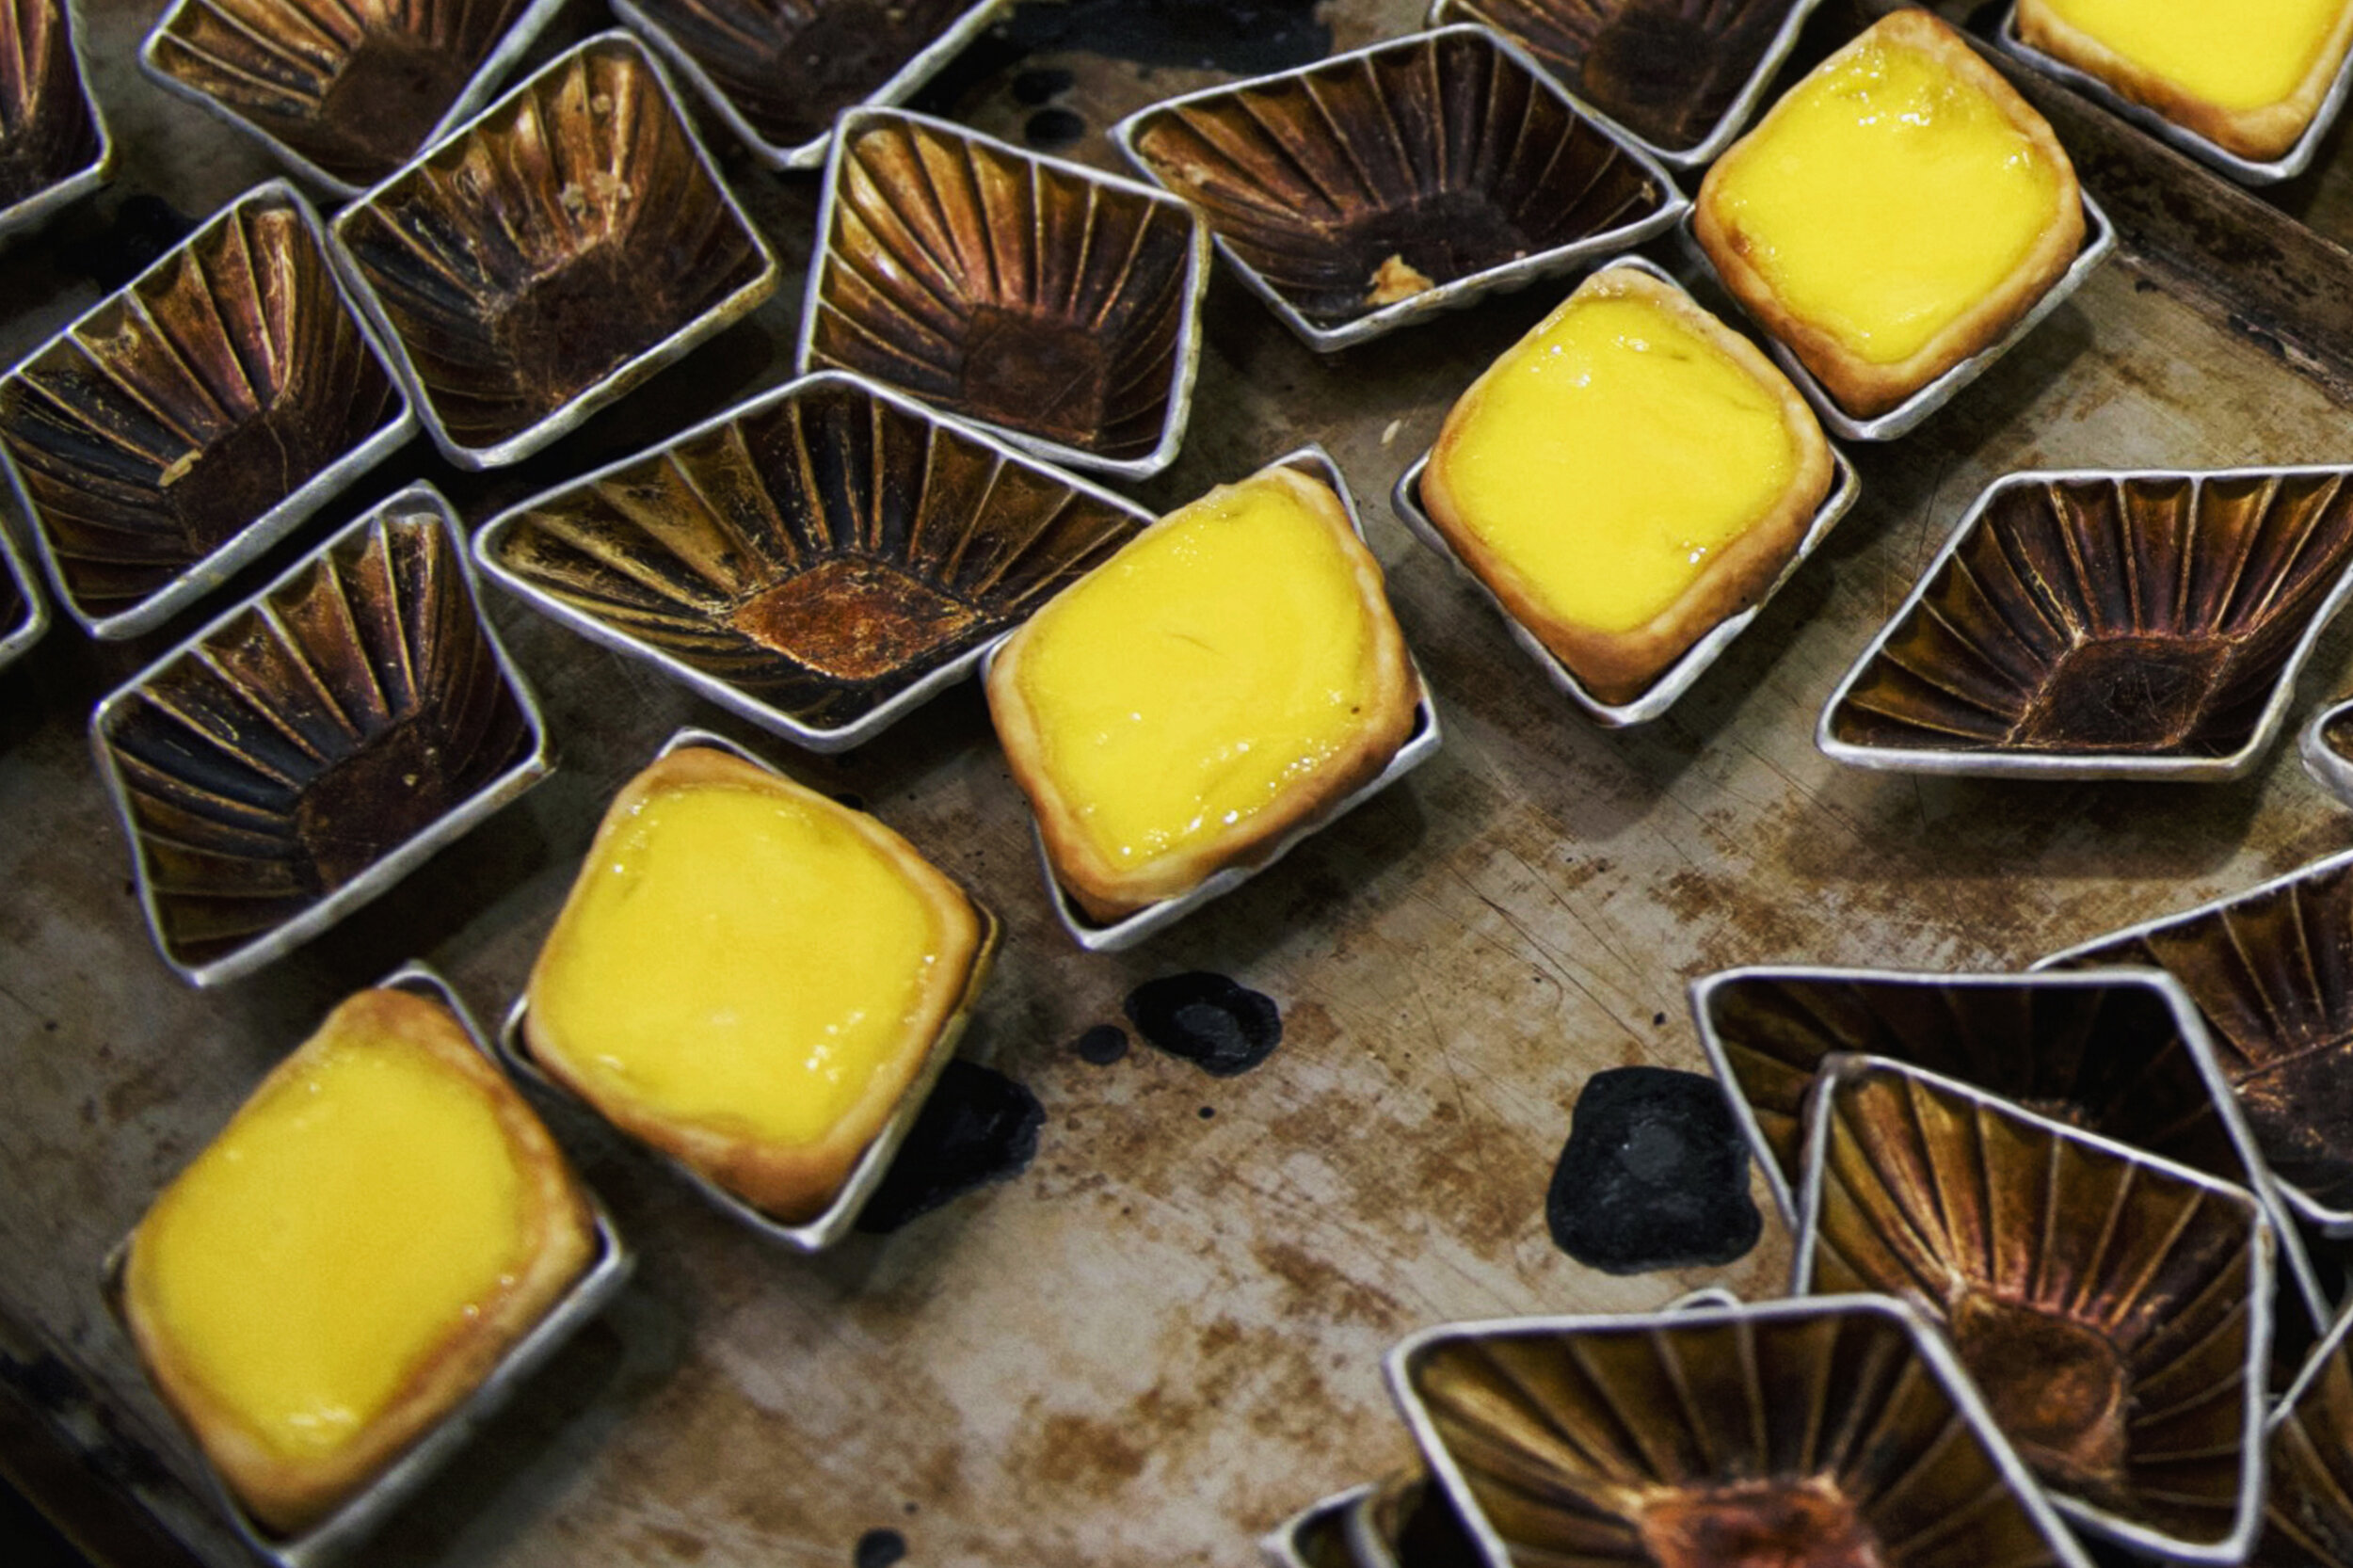  Freshly baked egg tarts cool off on a tray before they are shucked from their molds at the traditional Cantonese confectionery Tong Heng in Singapore April 21, 2018. 